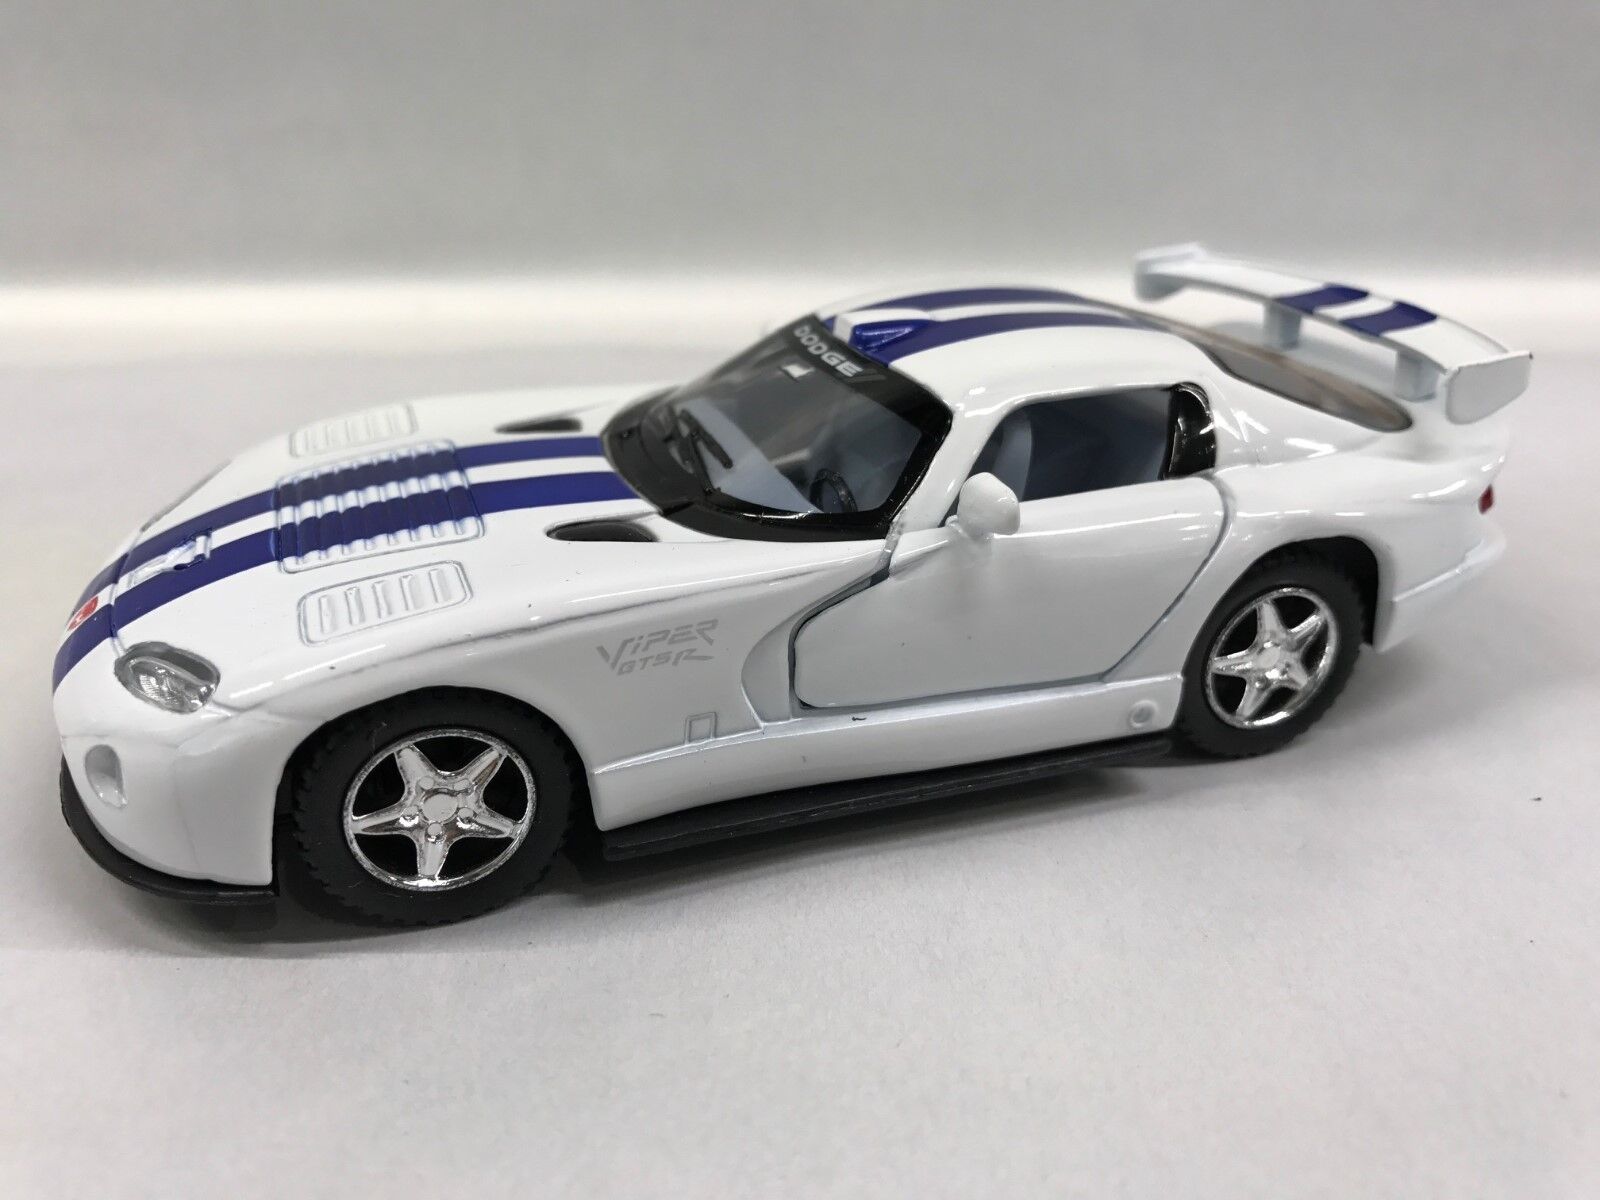 Dodge Viper GTS-R 1:36 Scale Pull back action KT.5039 White In stock